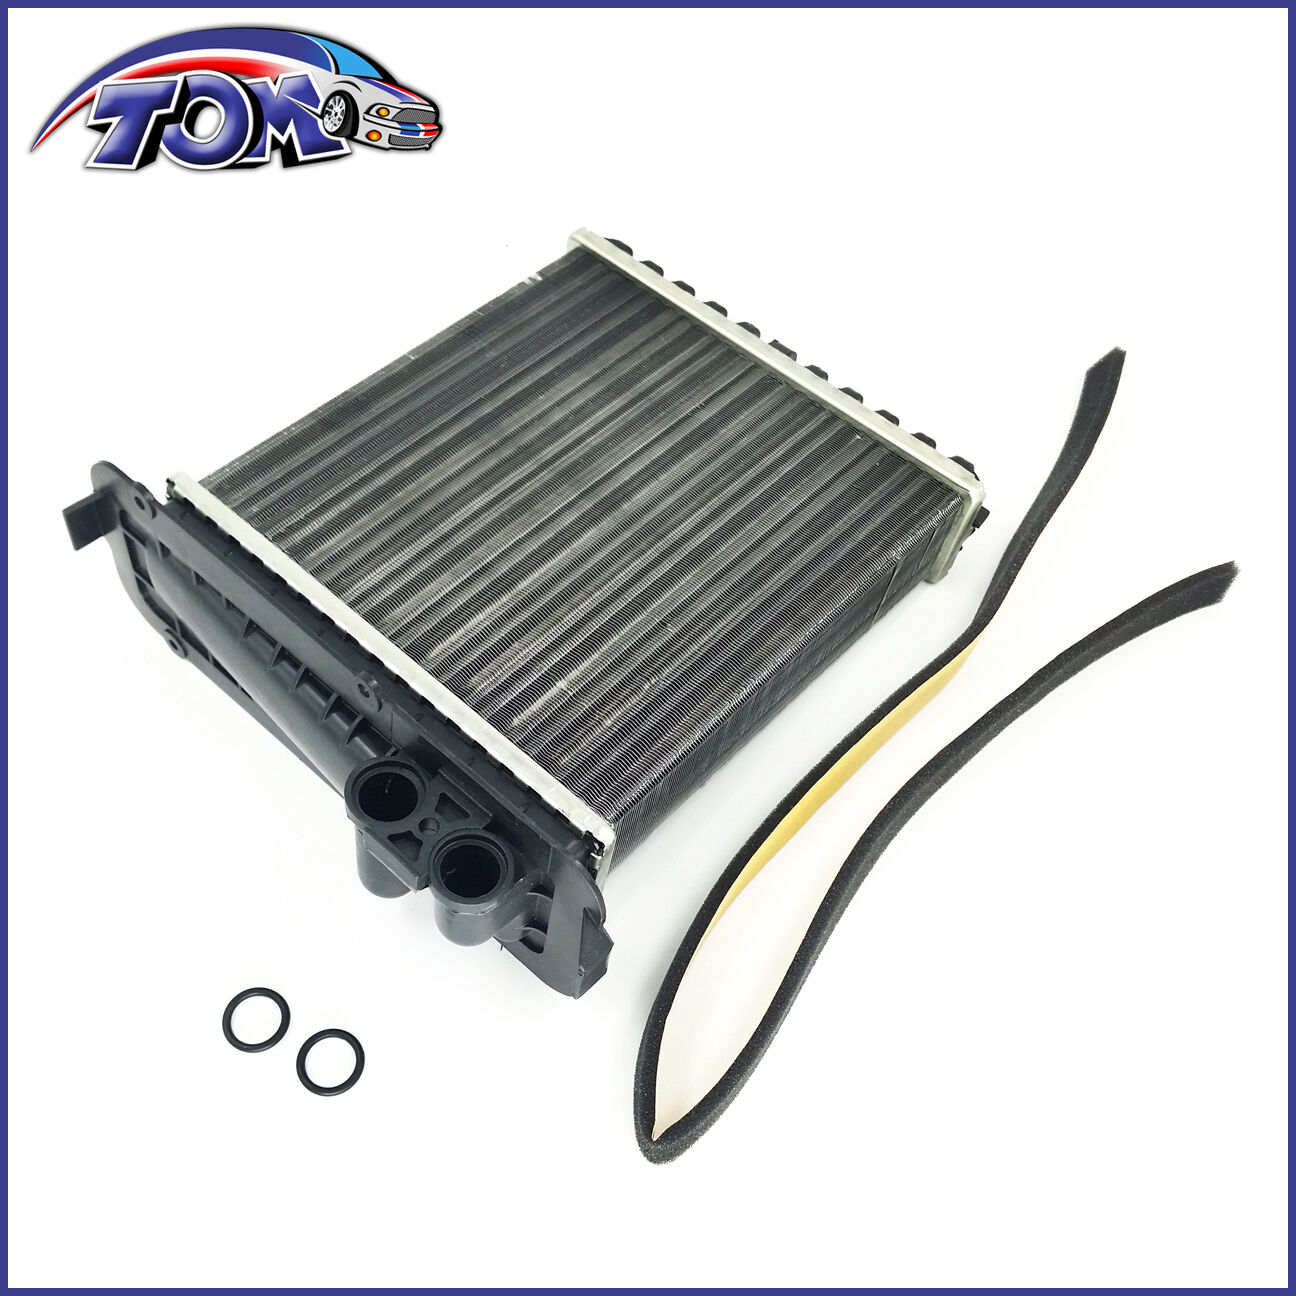 Brand New Volvo Heater Core for 850 S70 V70 C70 1994 - 2000 9144221